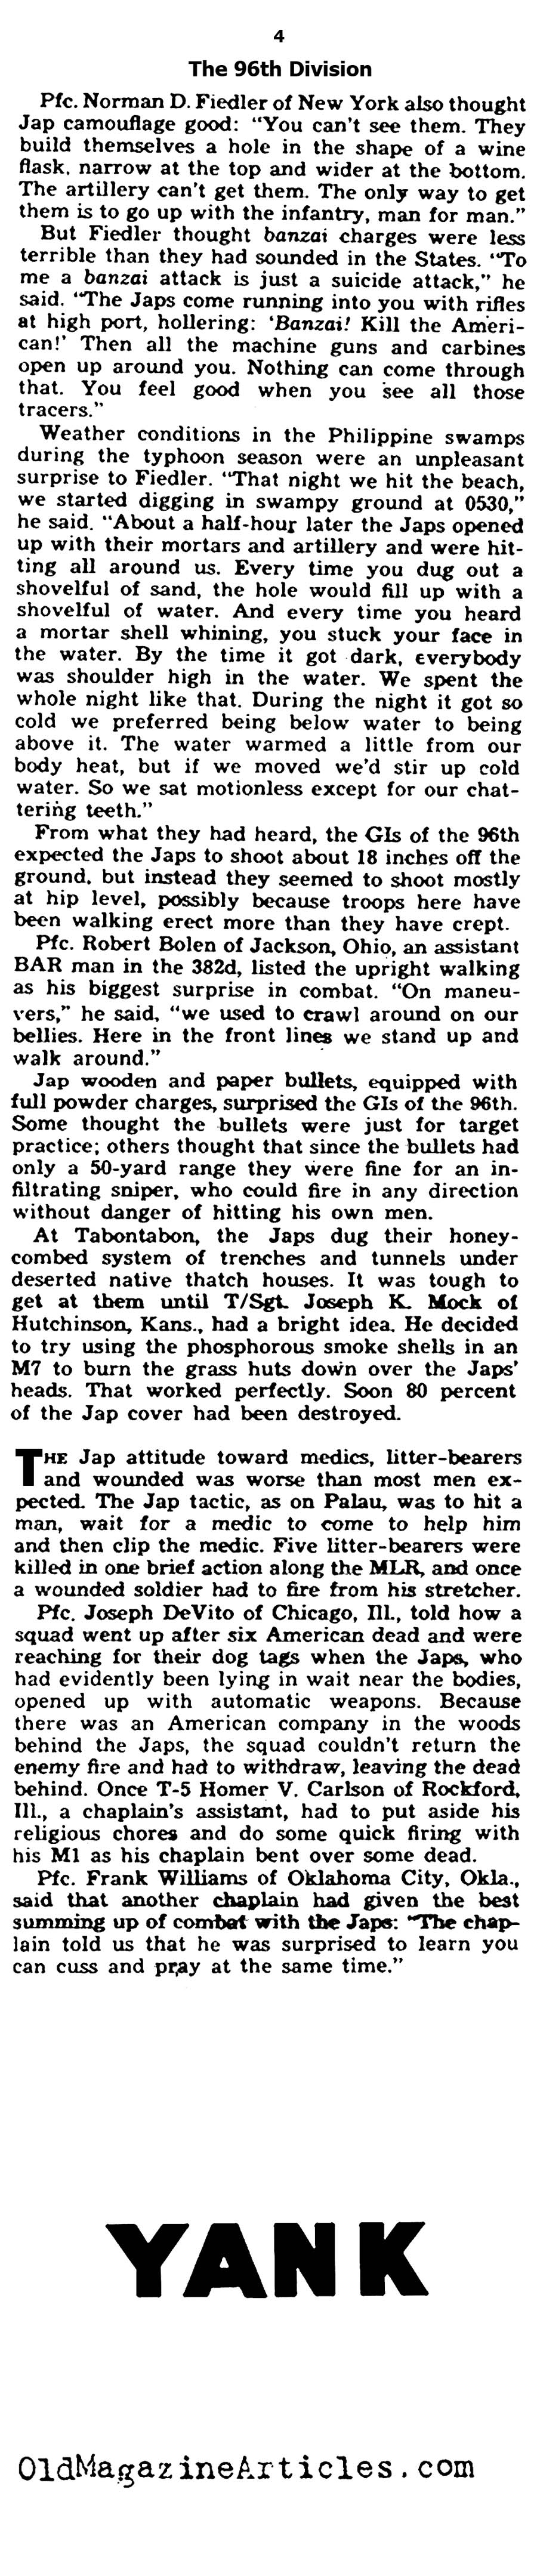 War Stories from the Pacific (Yank Magazine, 1945)